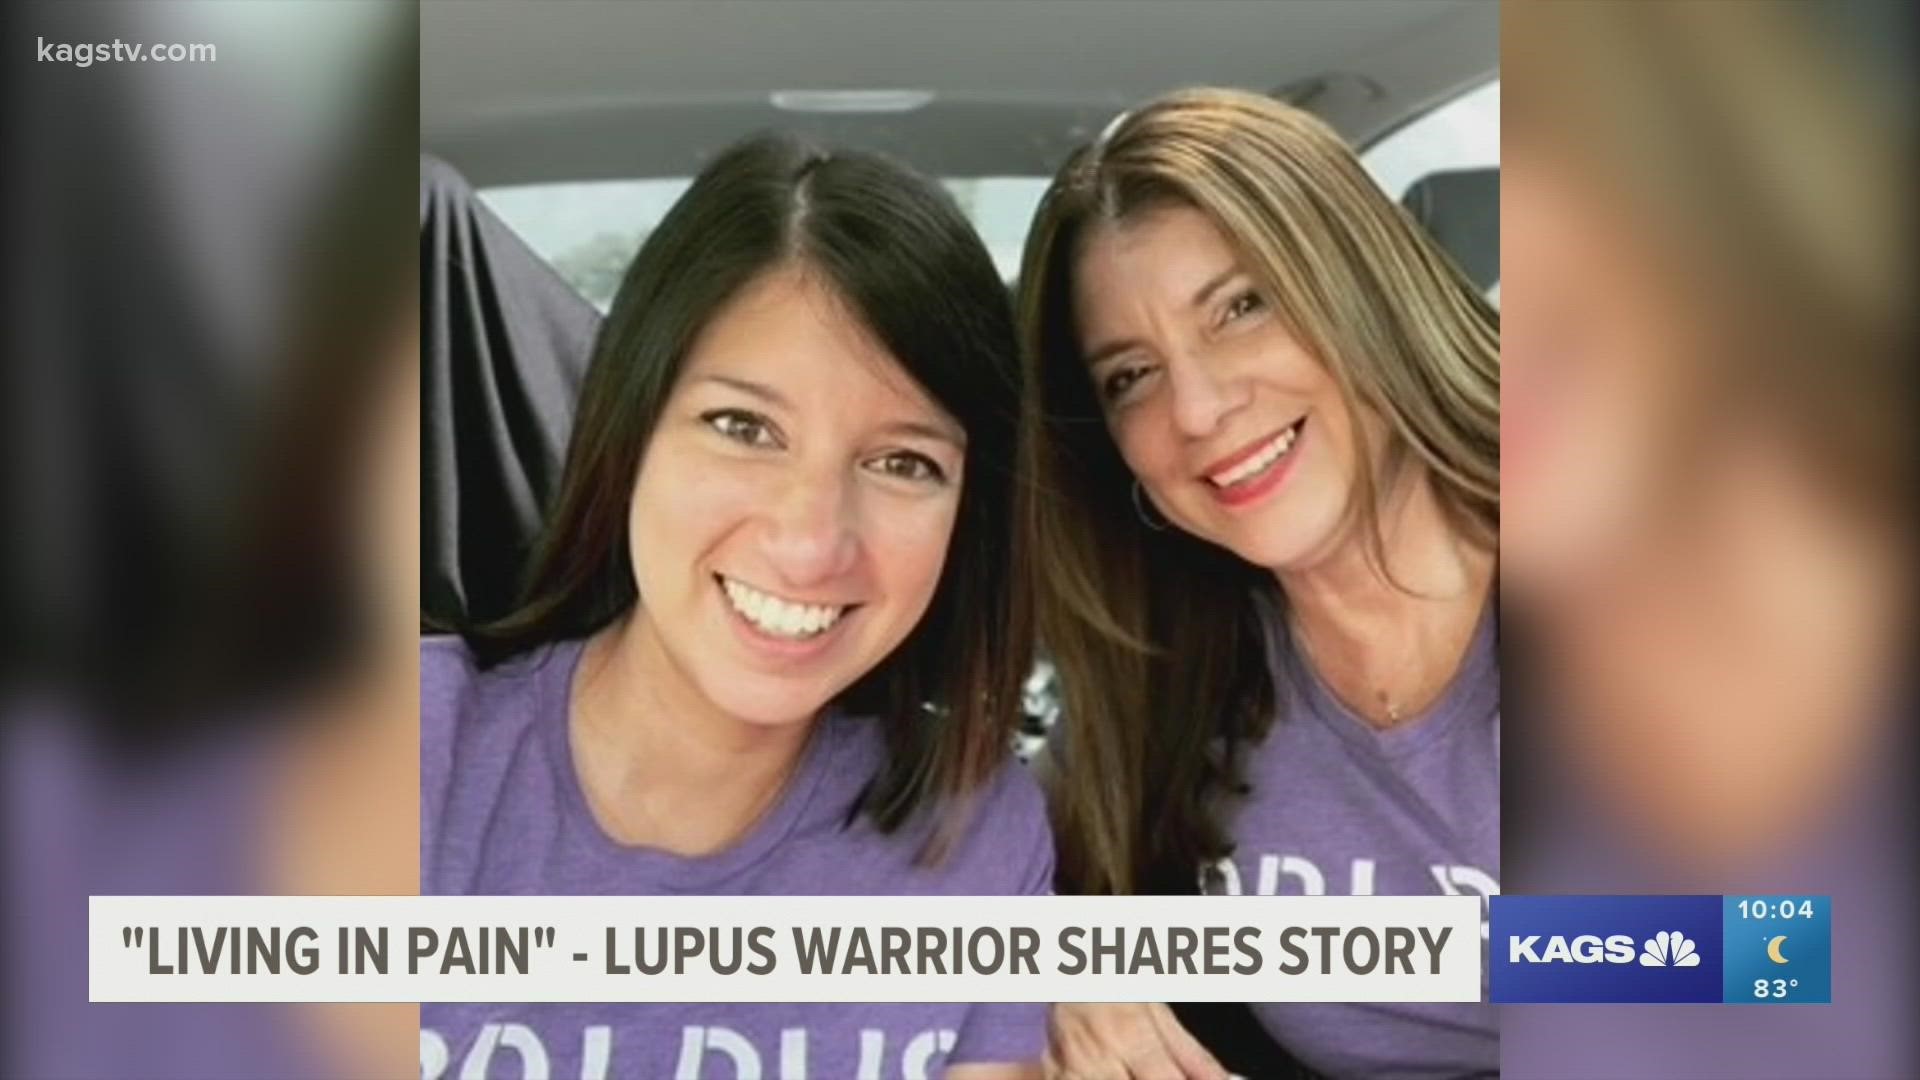 World Lupus Day is a way for people to understand what the disease is and how it can affect loved ones.